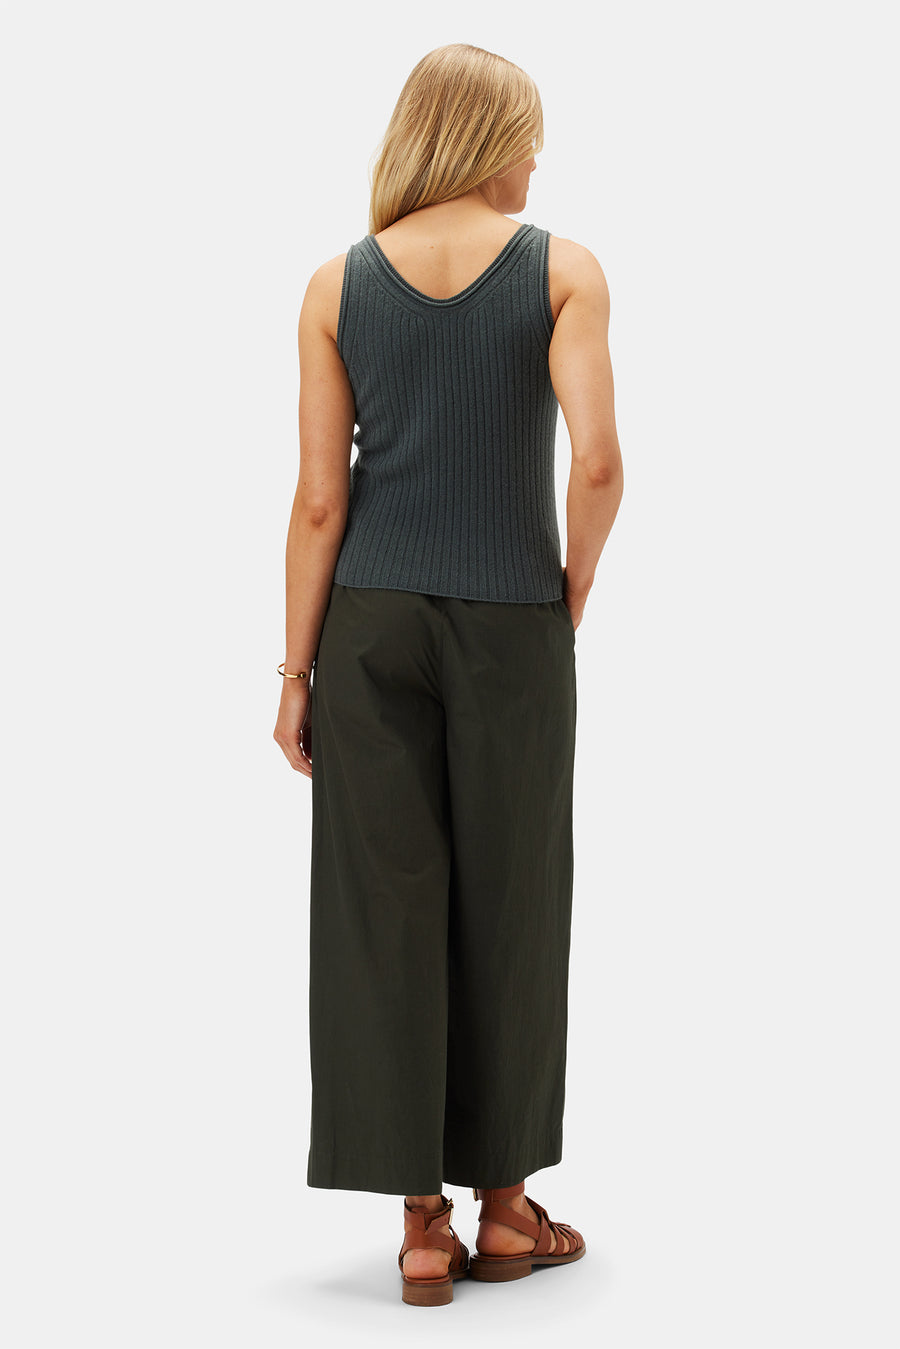 Nora Recycled Cashmere Tank - Olive Green